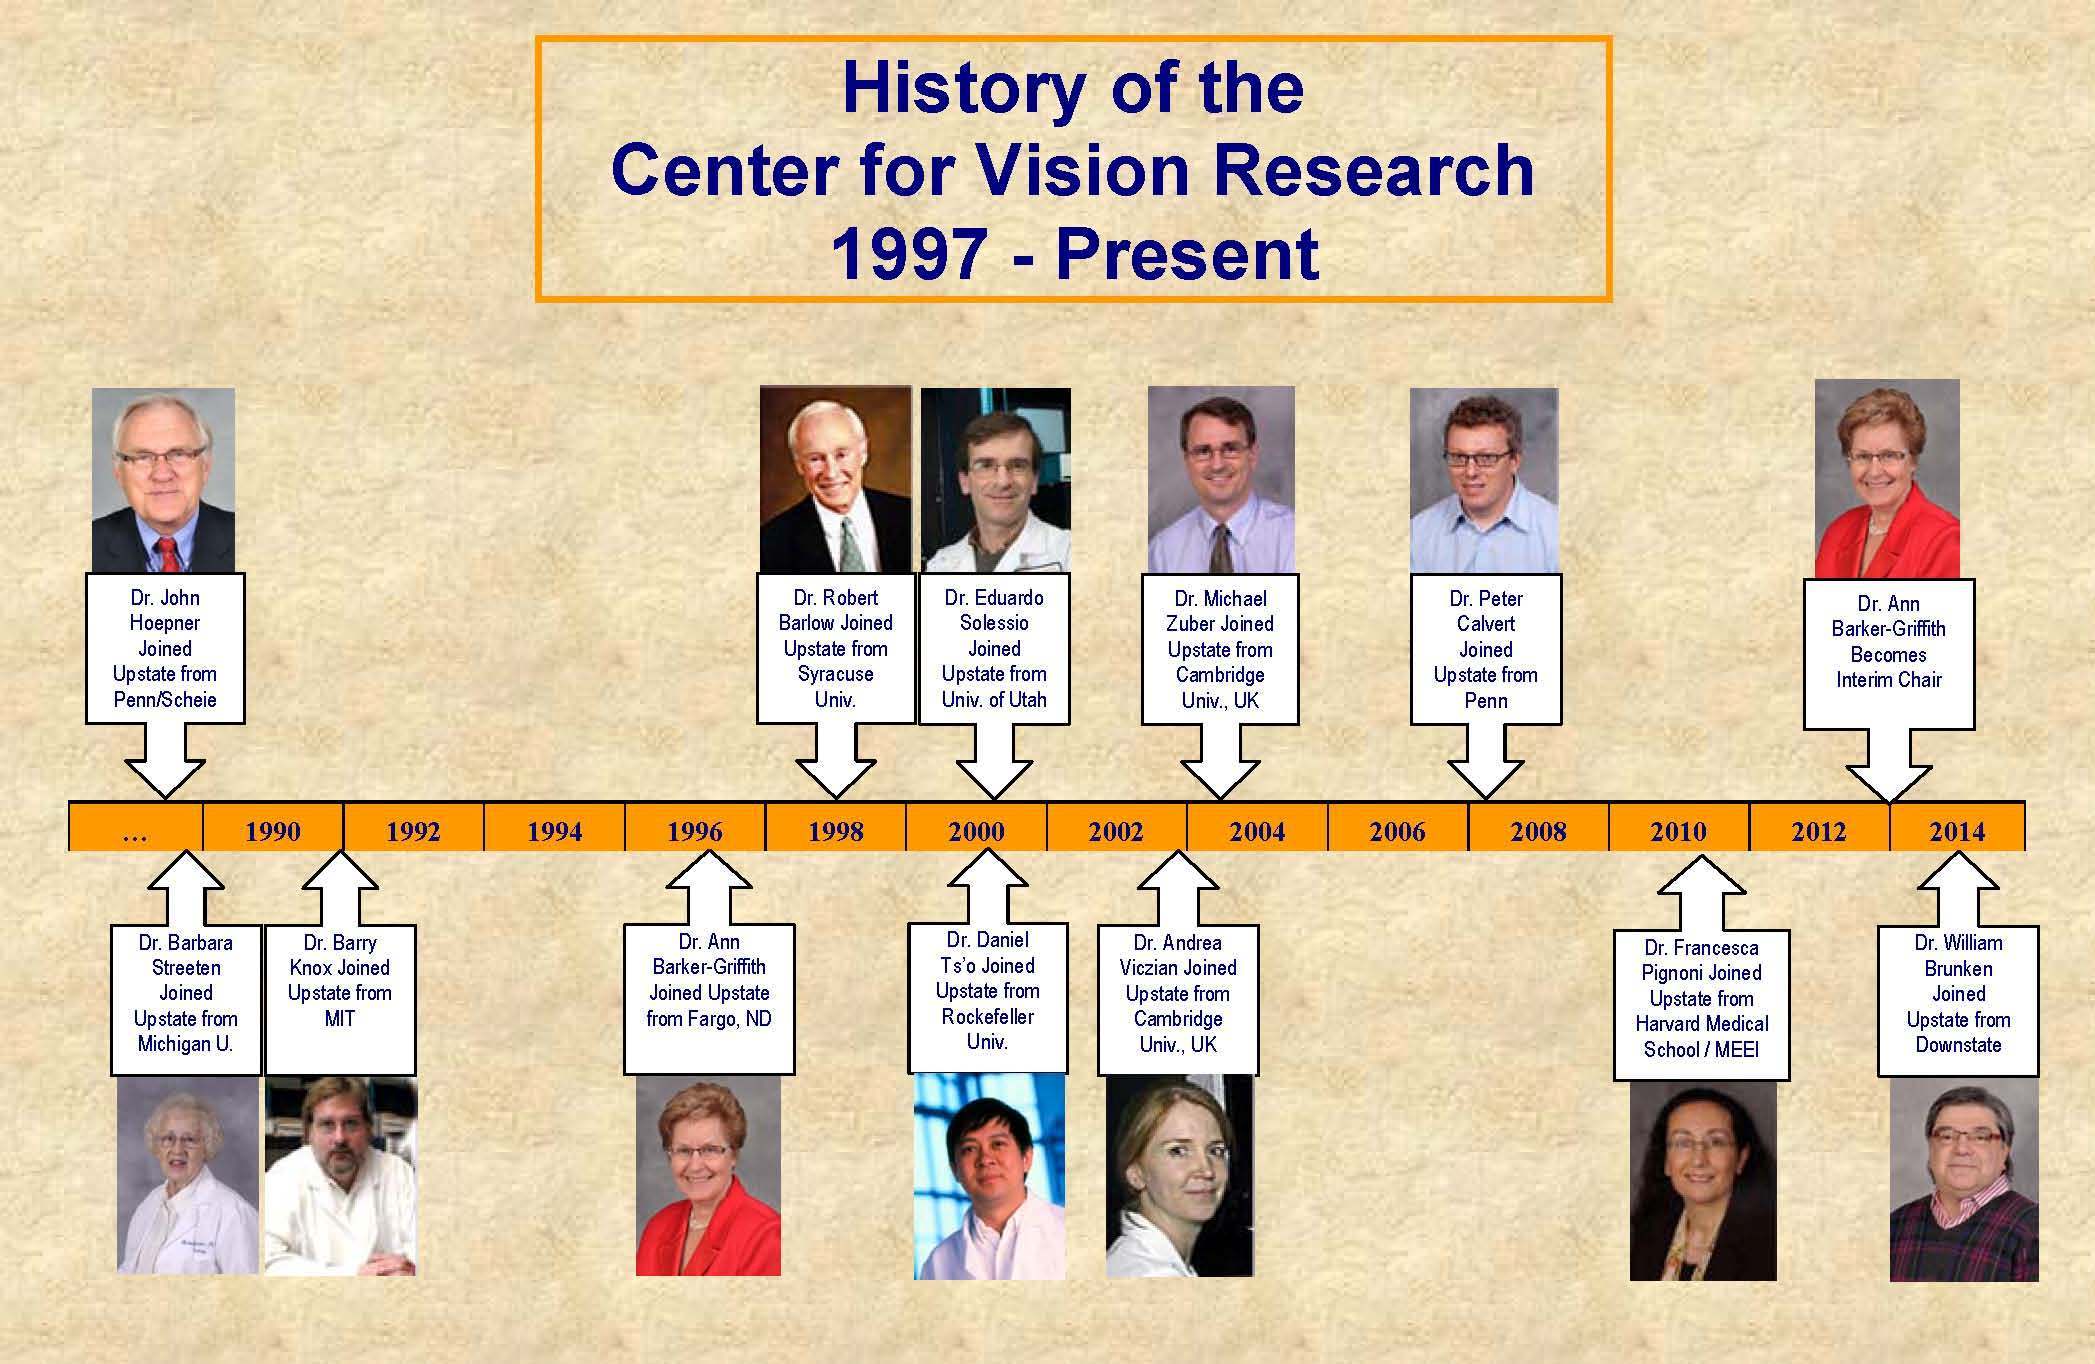 Timeline of when CVR Faculty joined Upstate